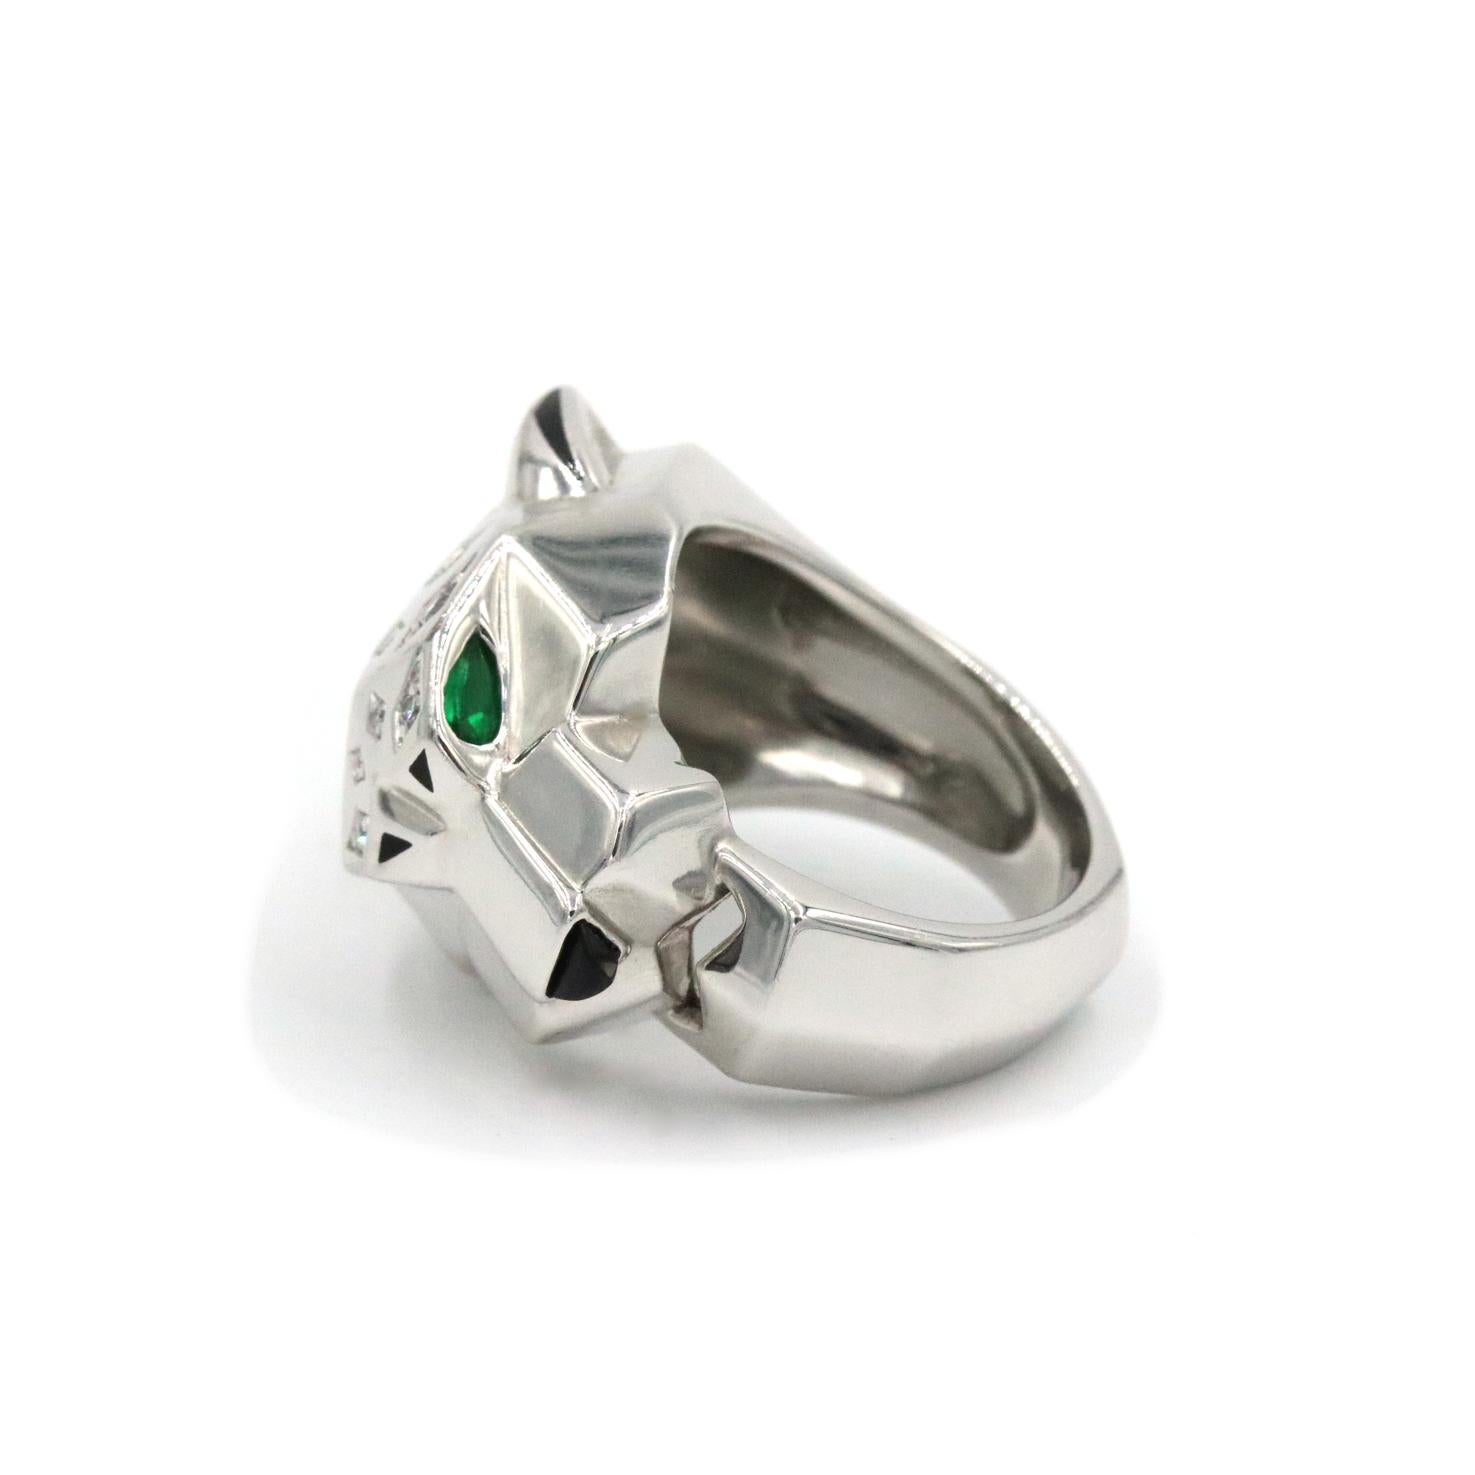 Cartier Panthere De Cartier 18K White Gold Ring. This Ring Features A Panther Shaped Head With Emerald Eyes, Diamond Spots And Onyx Ears And Nose. The Ring Comes With Original Box And Service Papers. SN.97043B

Measures Approx .71